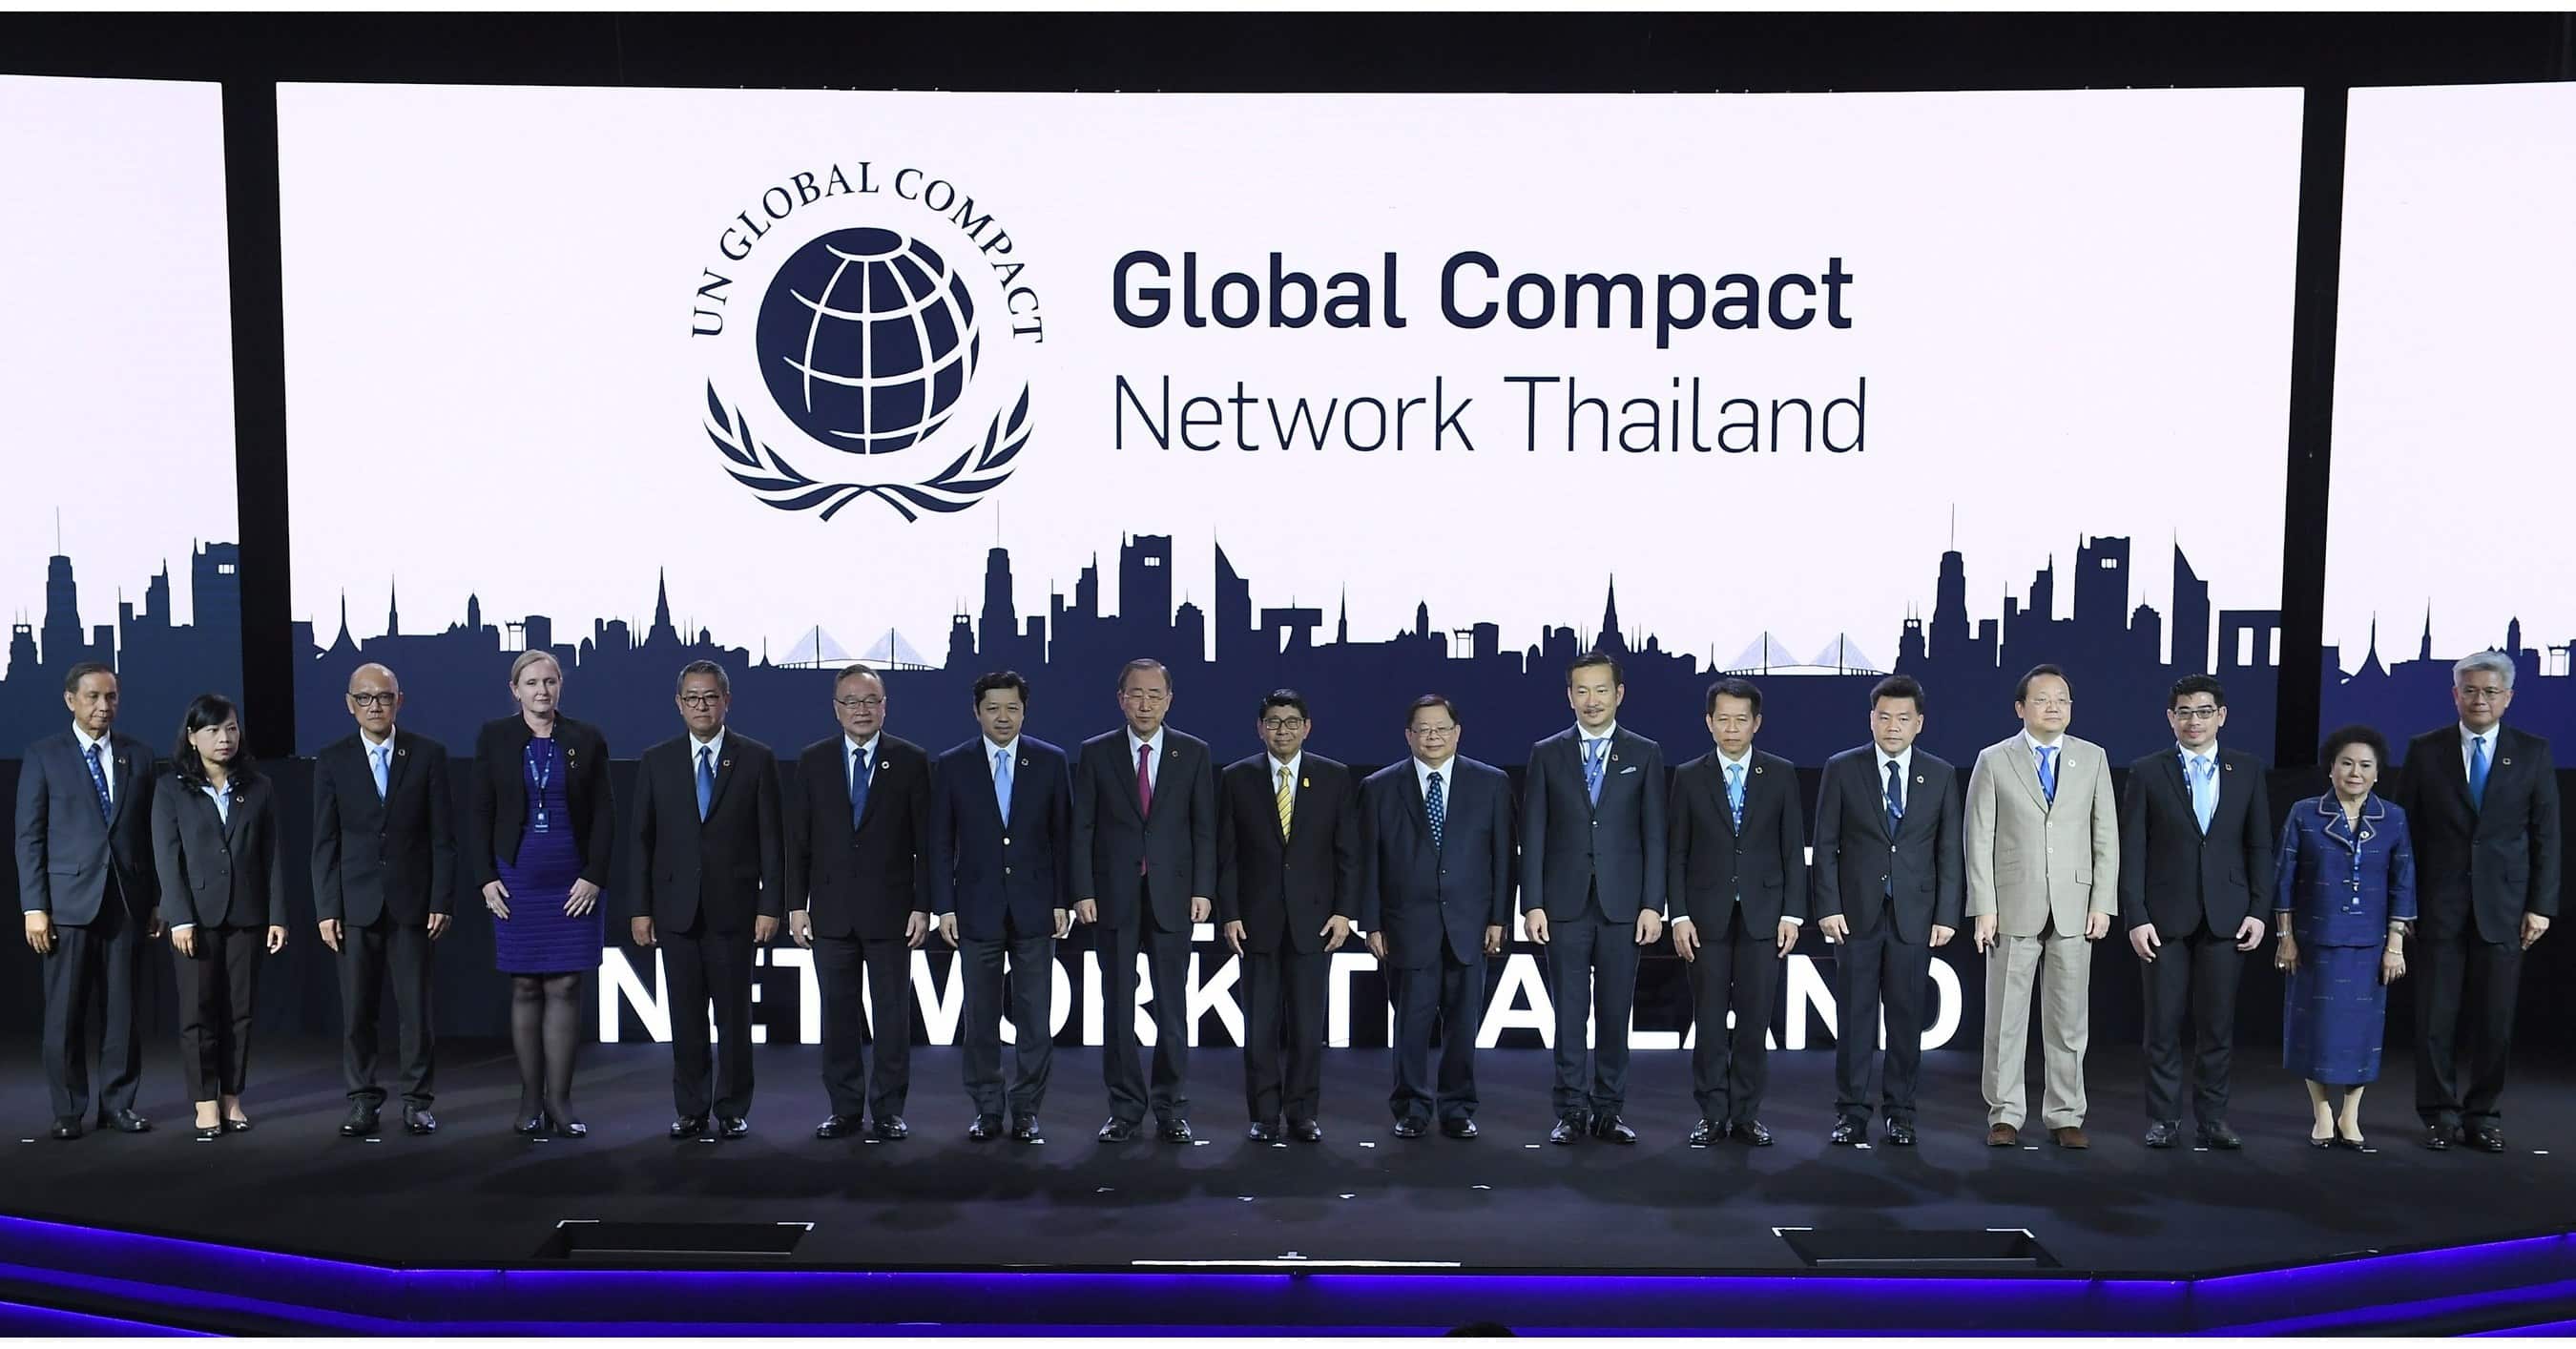 ban-ki-moon-attends-launch-of-global-compact-network-thailand-setting-off-private-sector-collaboration-for-countrys-sustainable-development-prnewswire Ban Ki-moon attends launch of Global Compact Network Thailand, setting off private-sector collaboration for country's sustainable development - PRNewswire